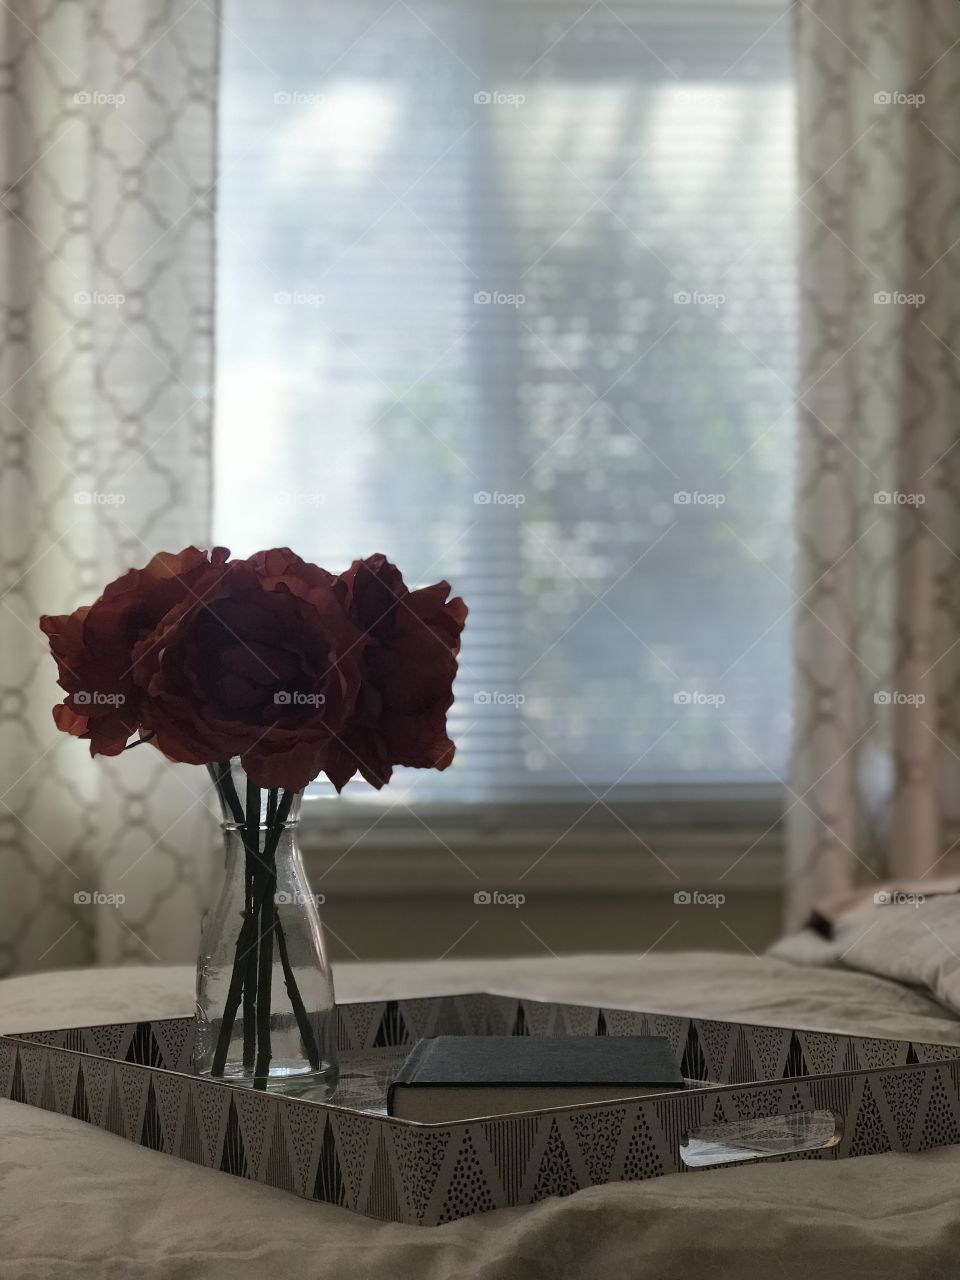 Flowers on a bed